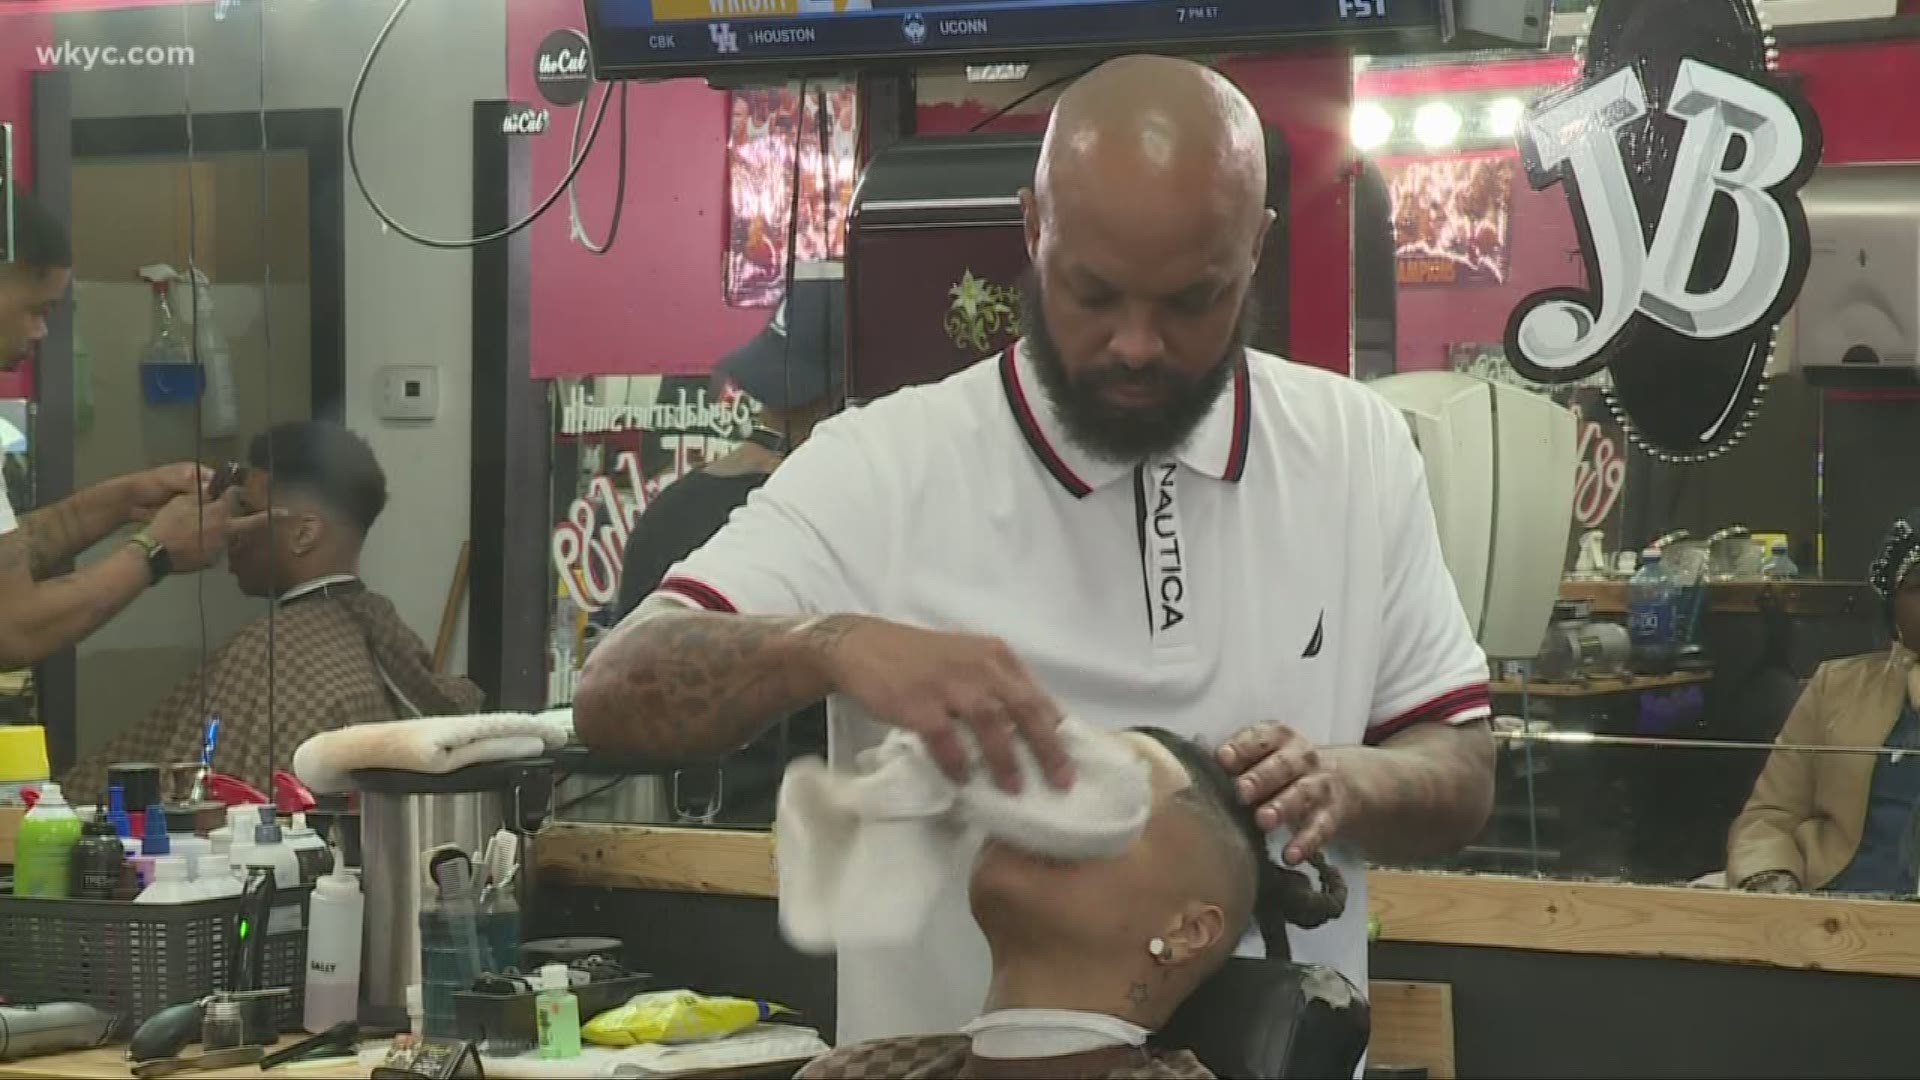 Carl Bachtel shares the story about a Cleveland barbershop that is doing its best to reward students.